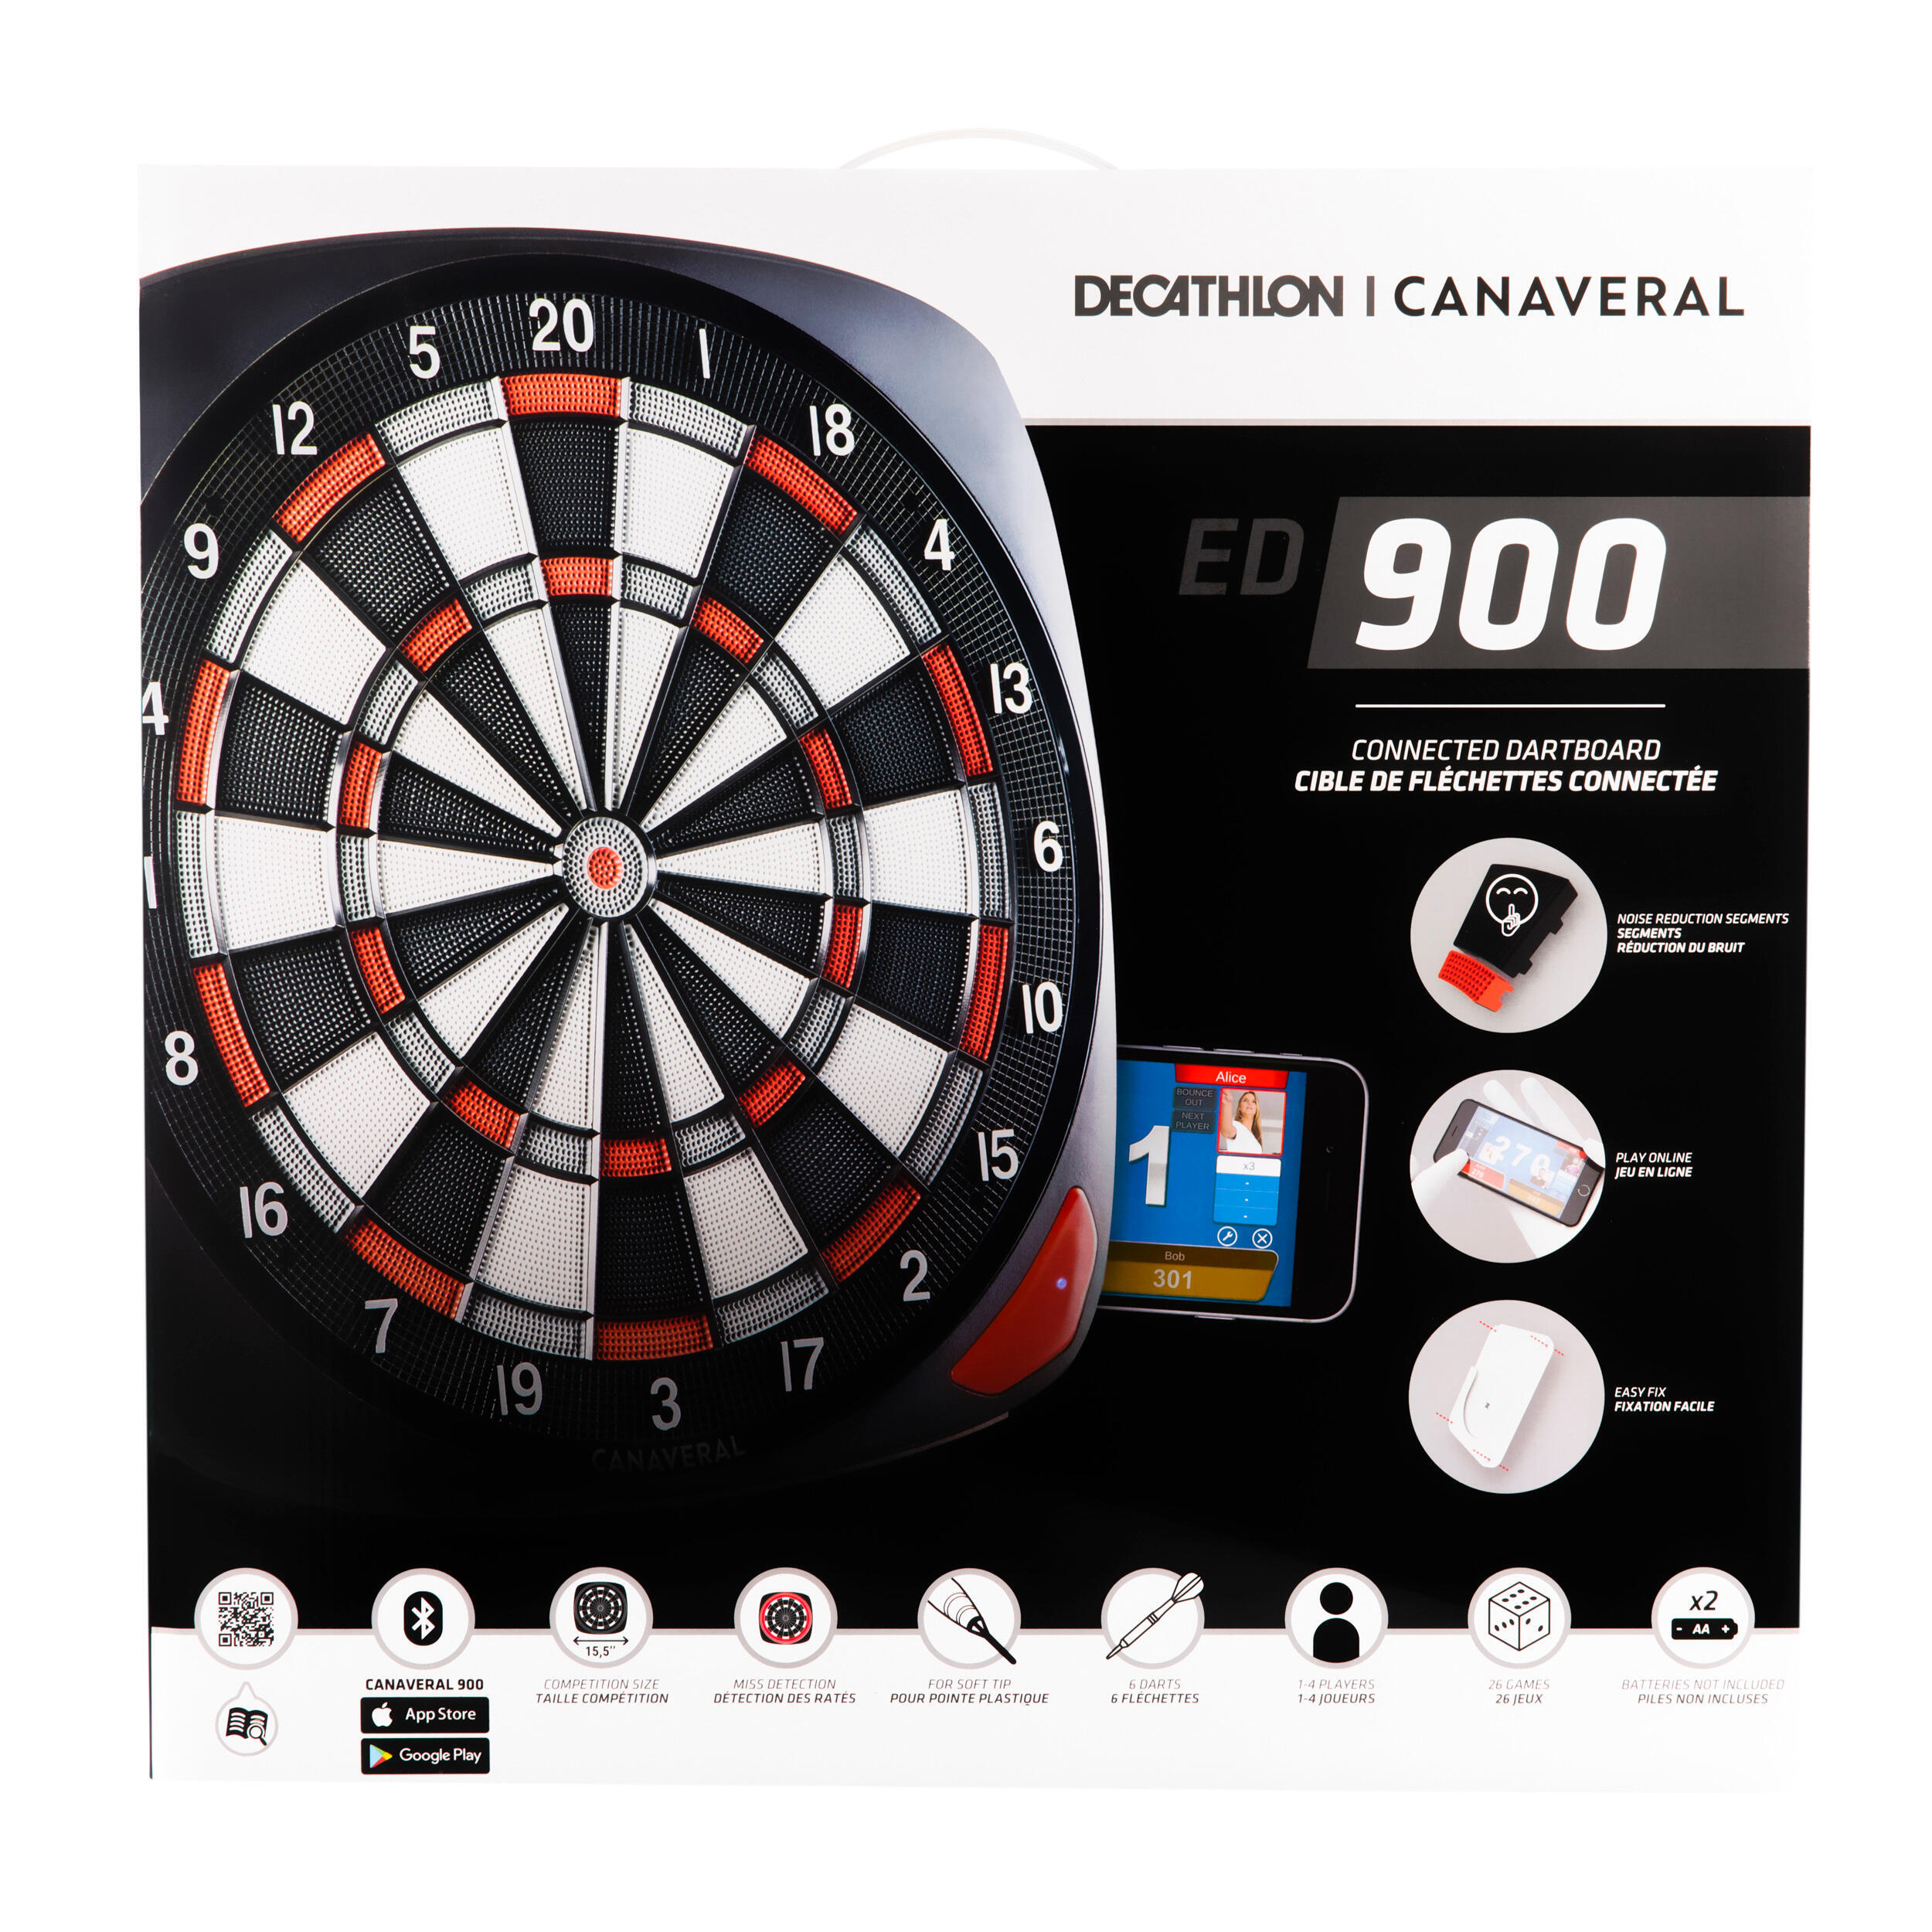 Electronic Connected Dartboard ED 900 2/25